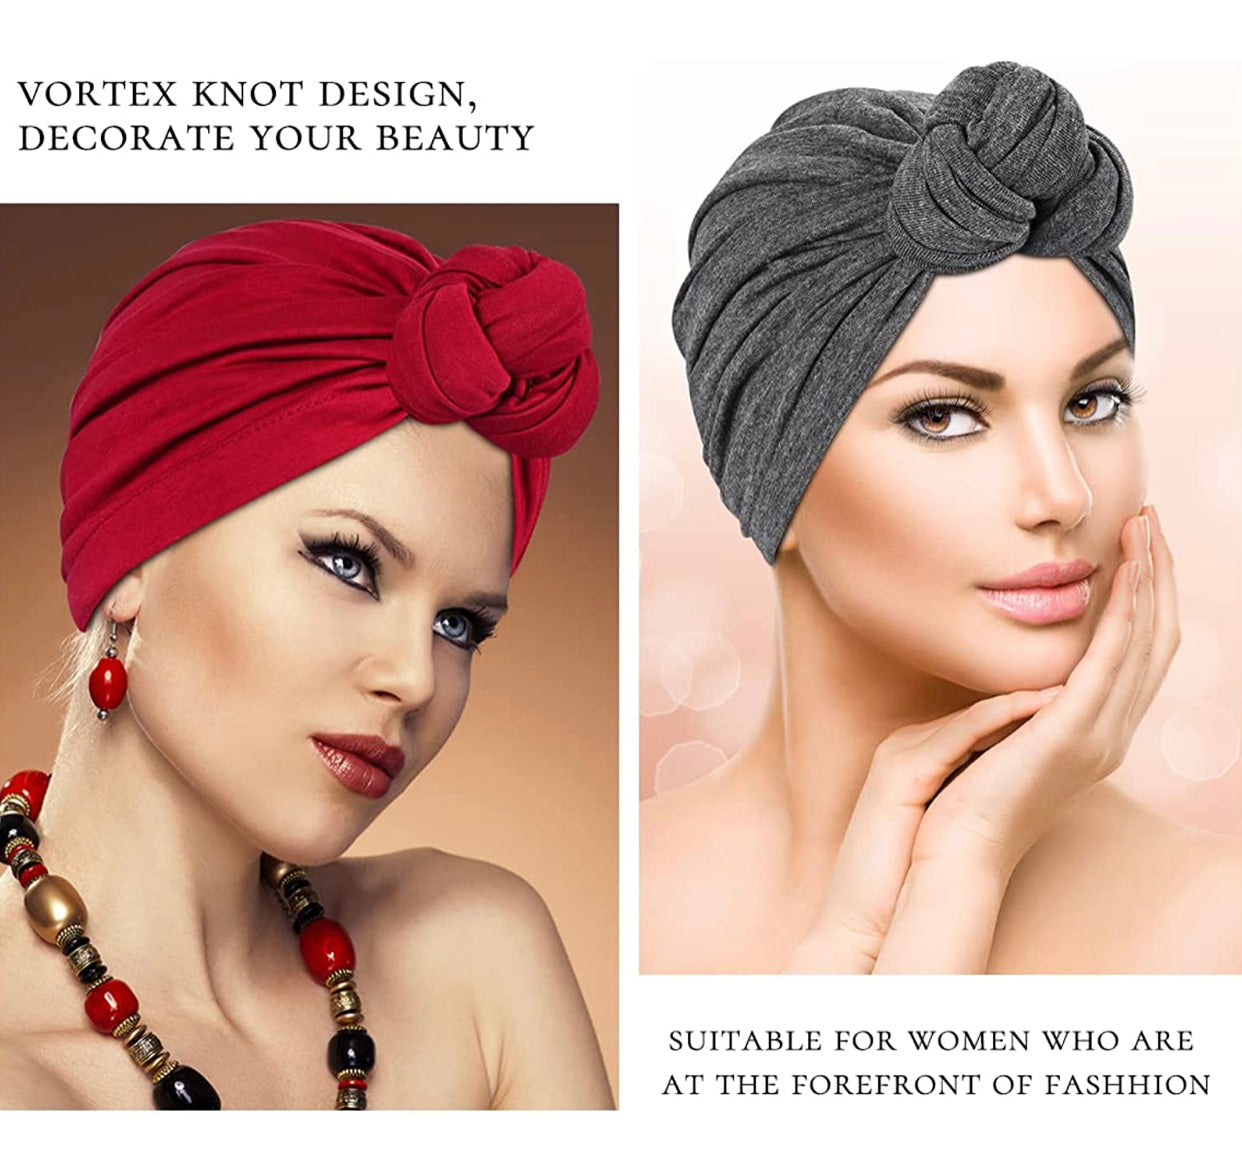 Various Colors & Styles! Pre-Tied Head-Wraps / Turbans (18 styles to choose from)